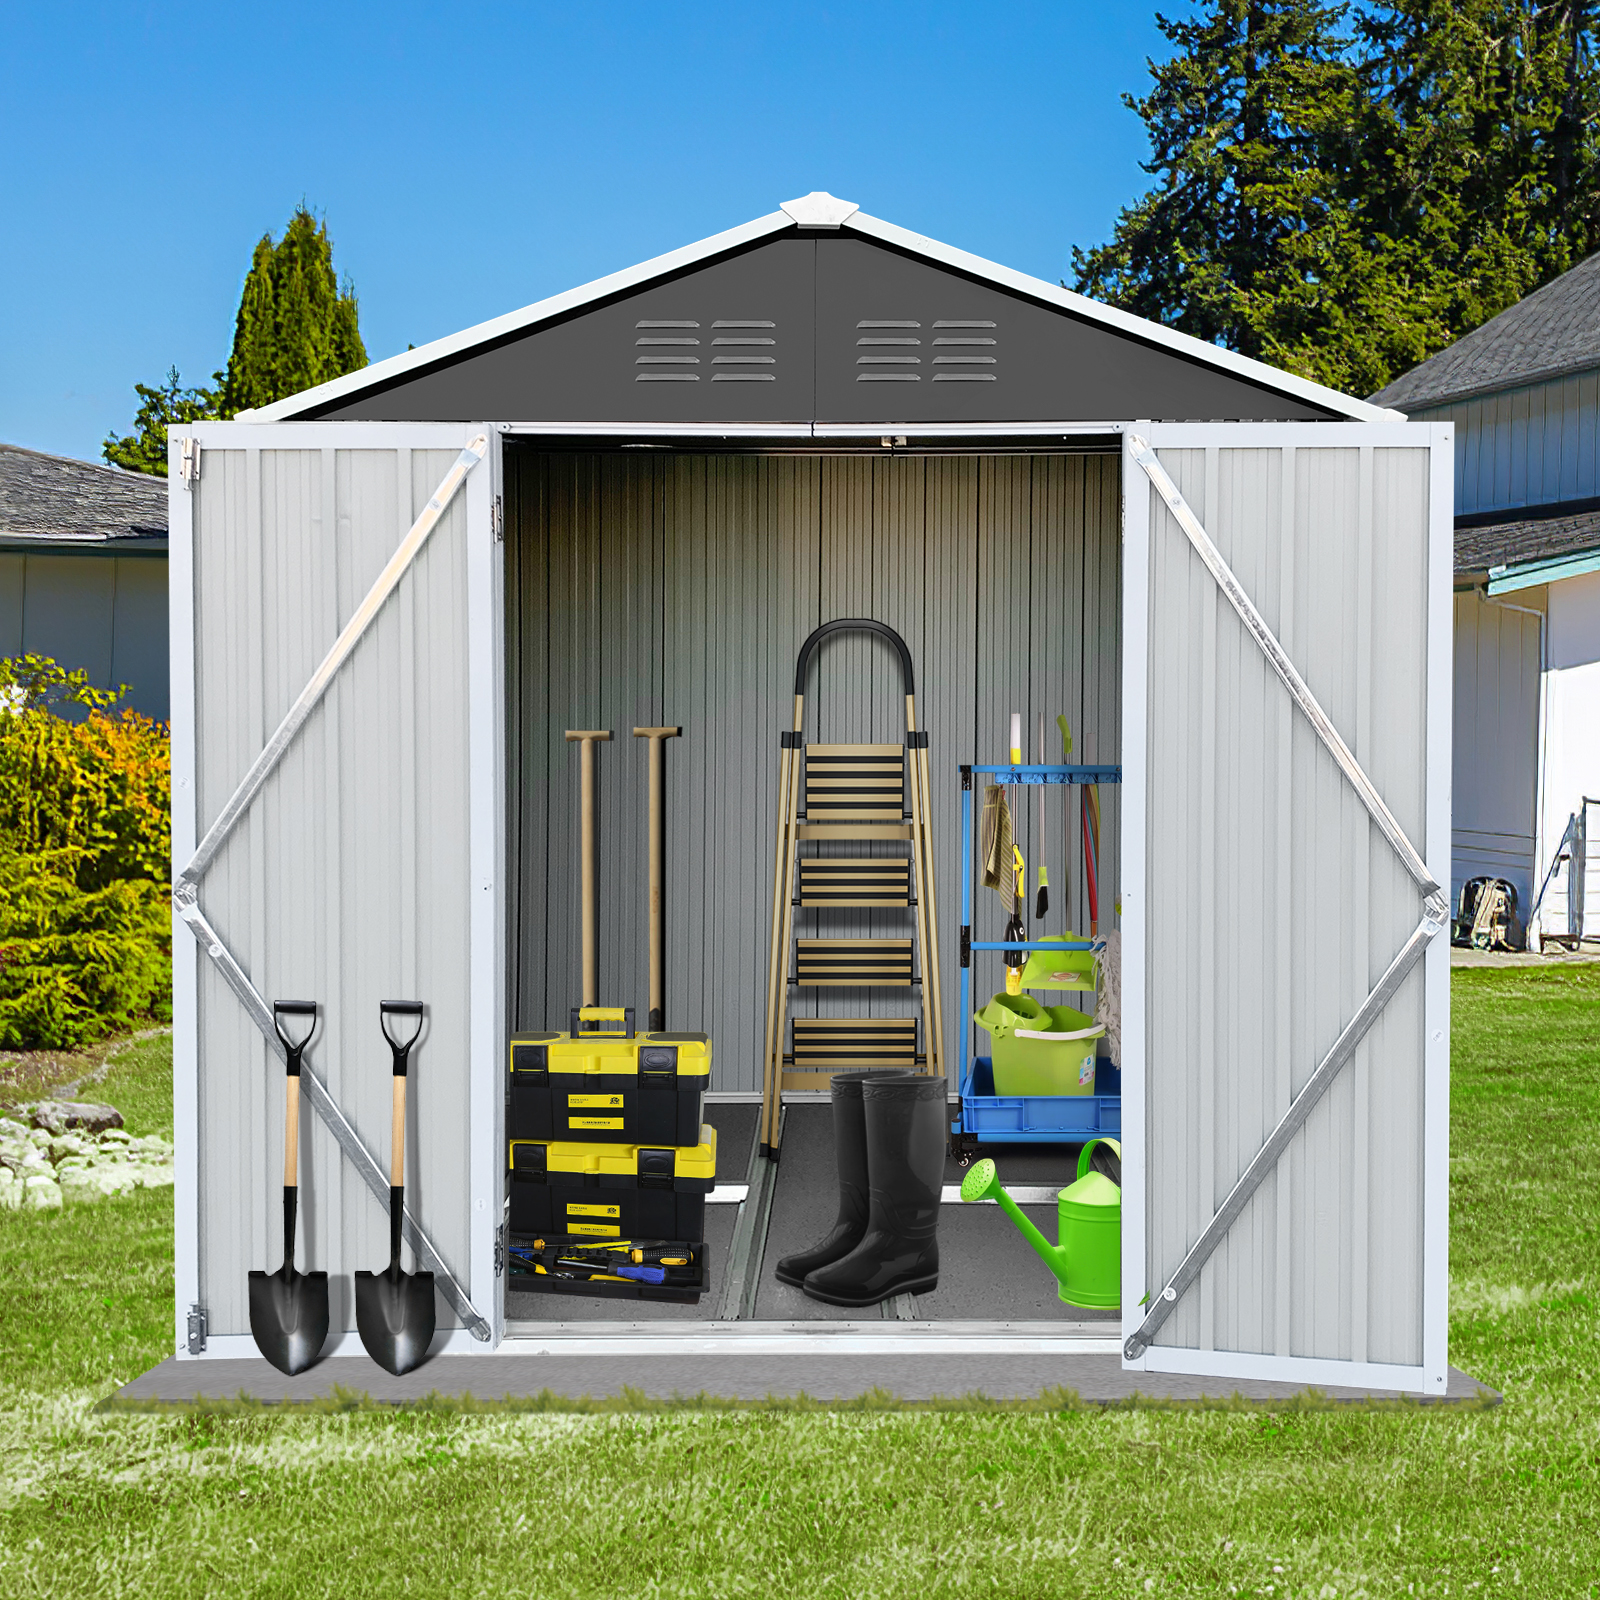 6' x 4' Outdoor Metal Storage Shed, Tools Storage Shed, Galvanized Steel Garden Shed with Lockable Doors, Outdoor Storage Shed for Backyard, Patio, Lawn, D8311 - image 1 of 9